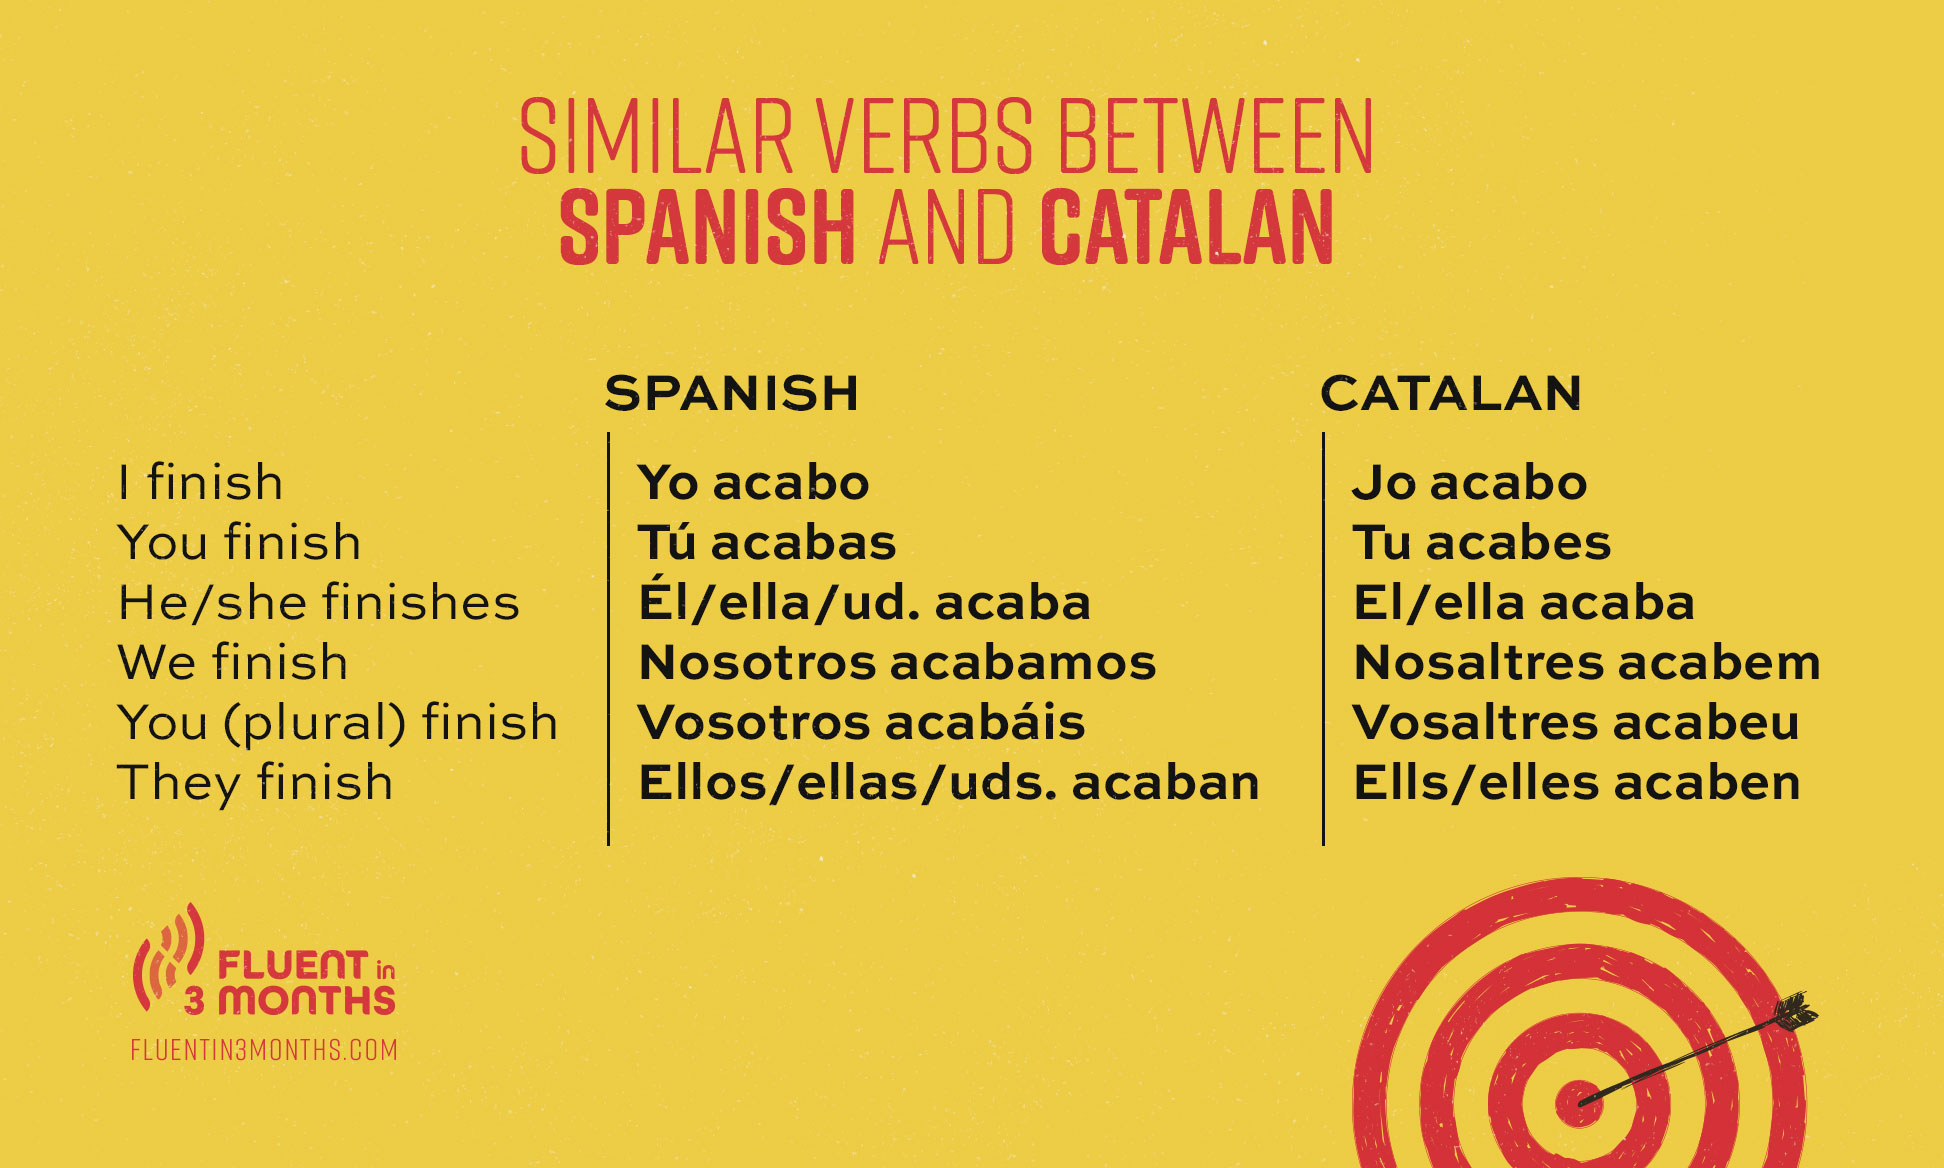 CATALAN VS SPANISH: WHAT DO THEY SOUND LIKE? 